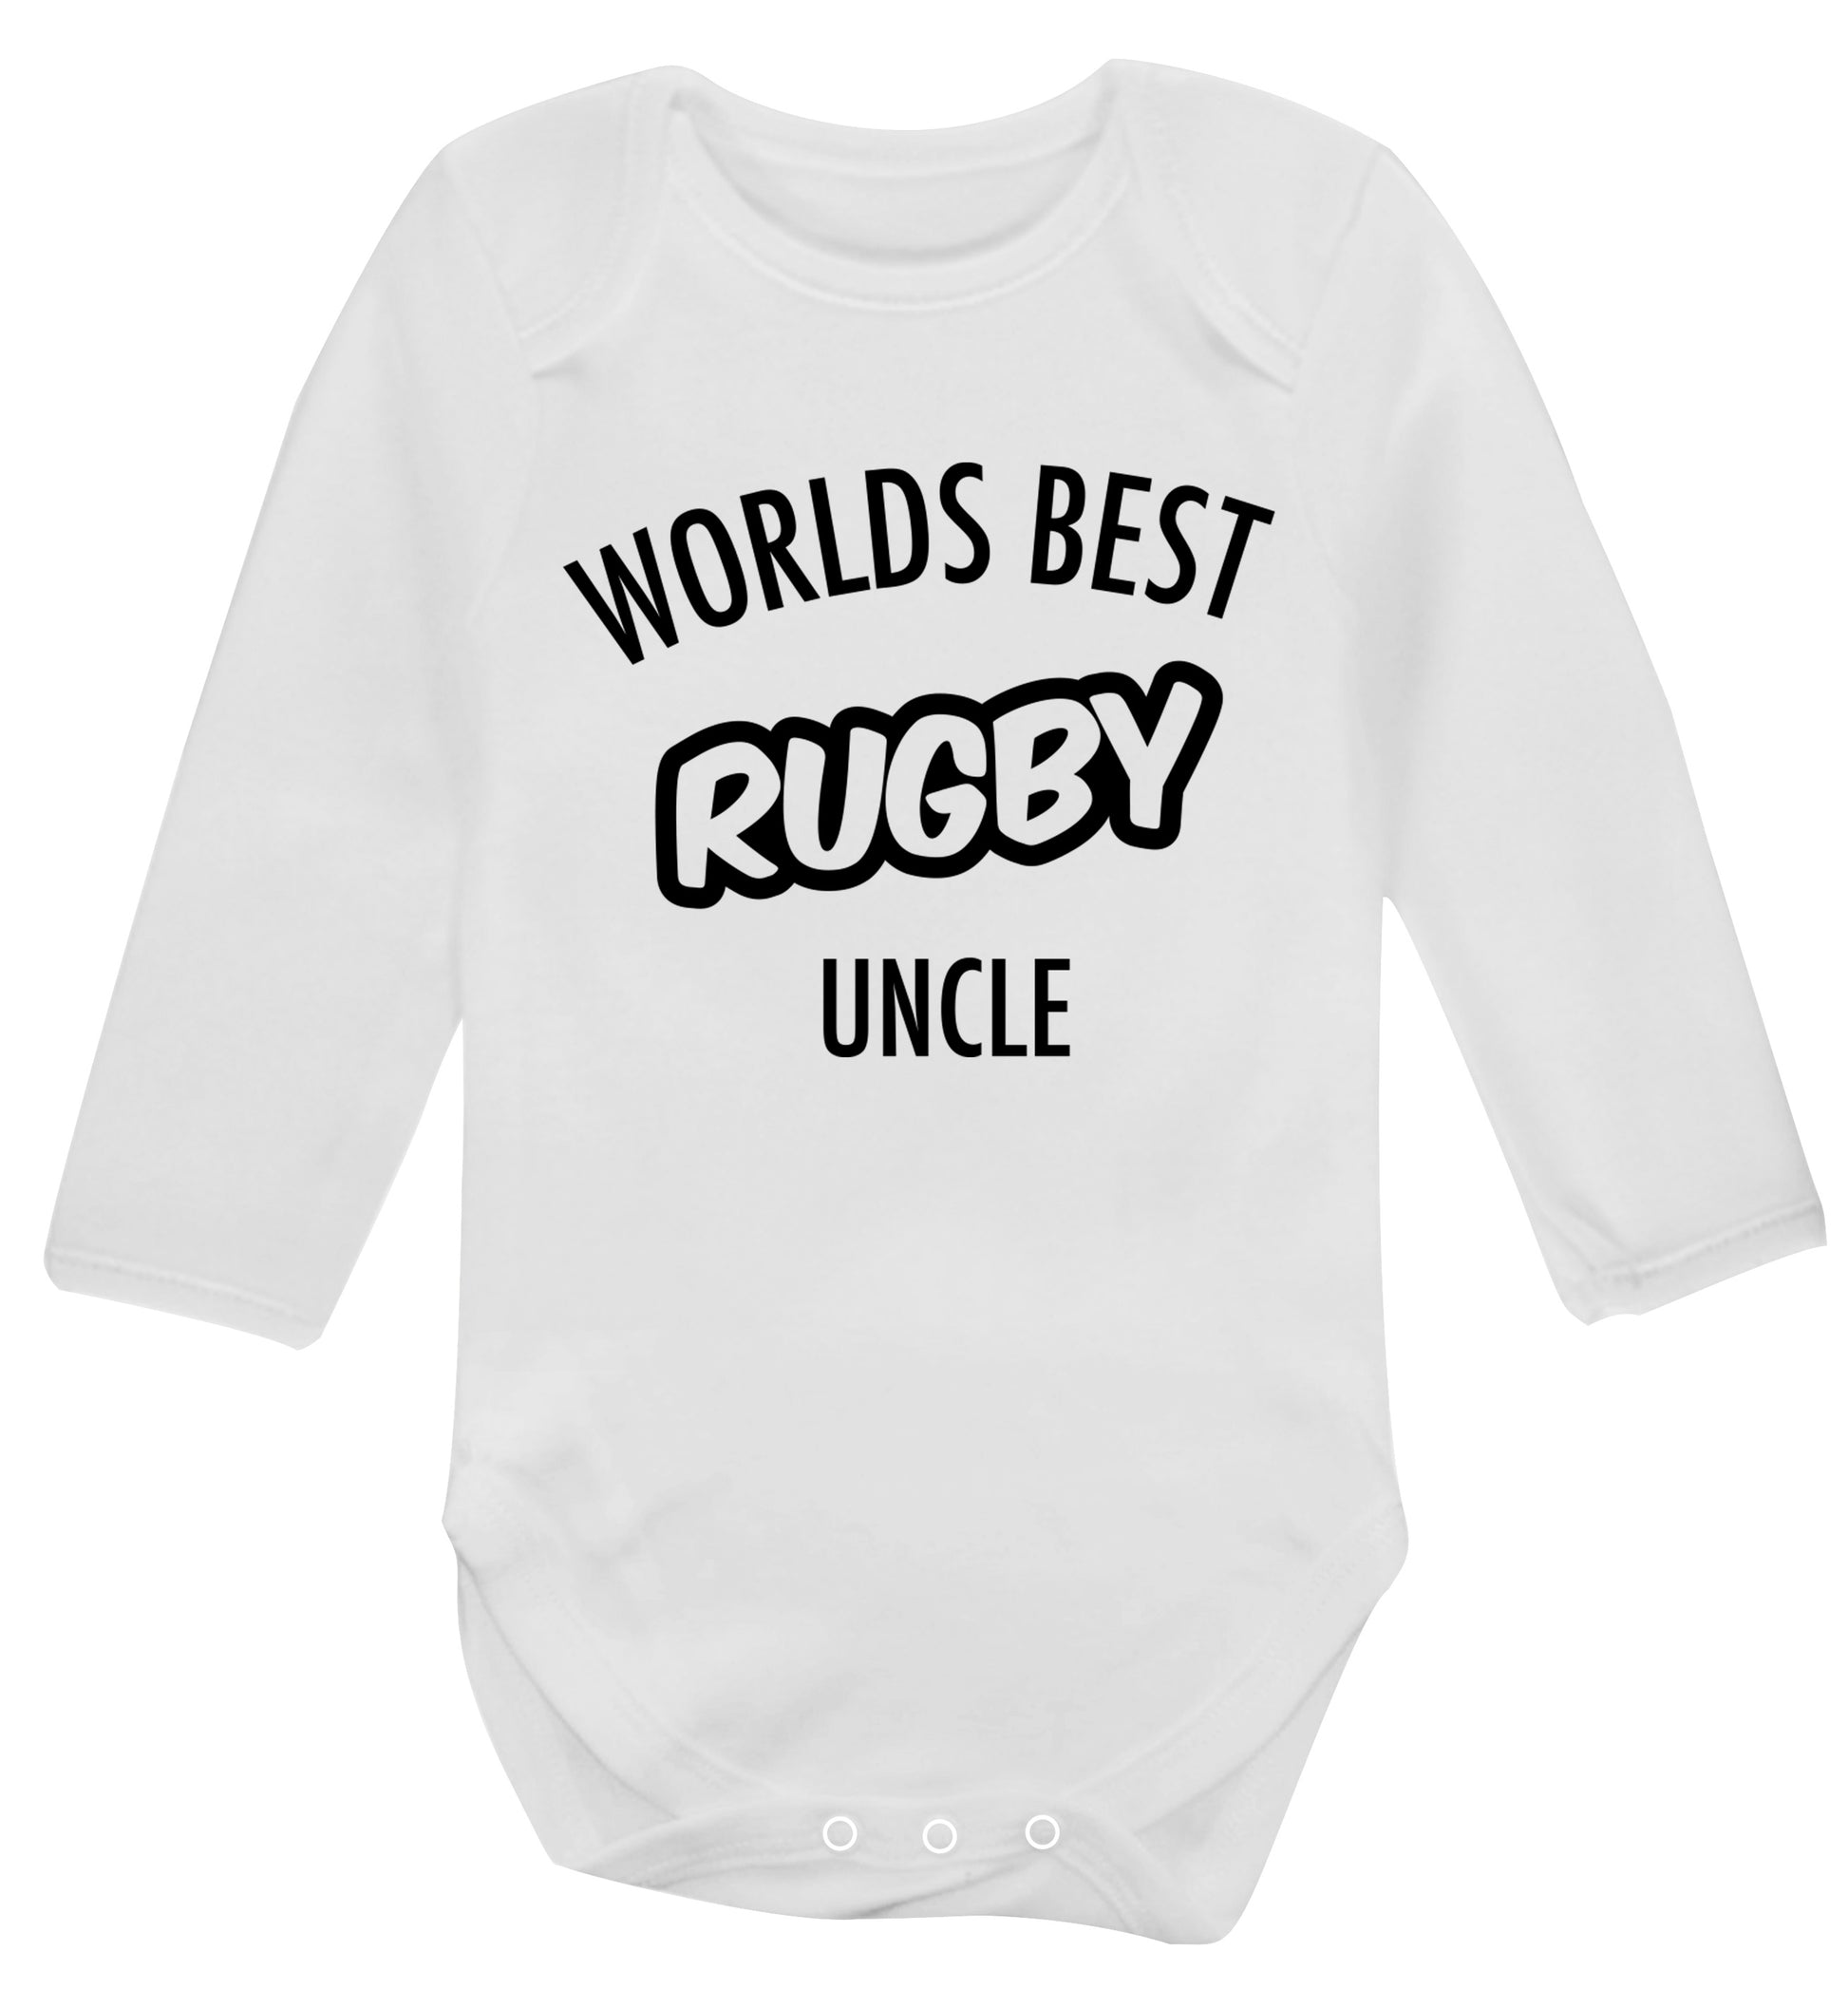 Worlds best rugby uncle Baby Vest long sleeved white 6-12 months